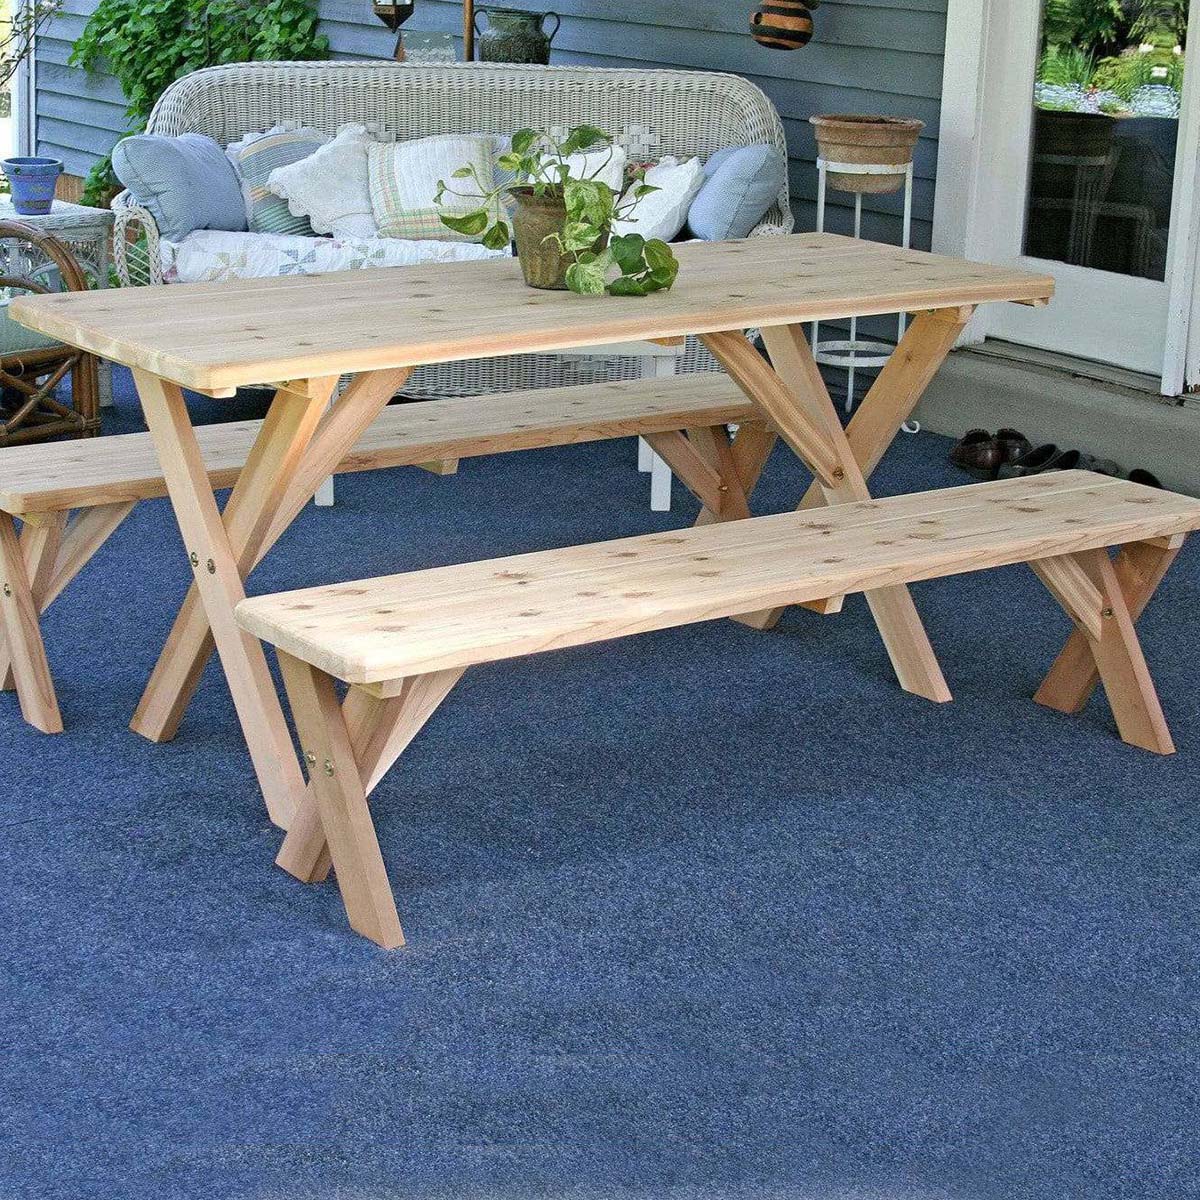 Creekvine Designs Red Cedar 10' Picnic Table with Detached Benches-Rustic Furniture Marketplace